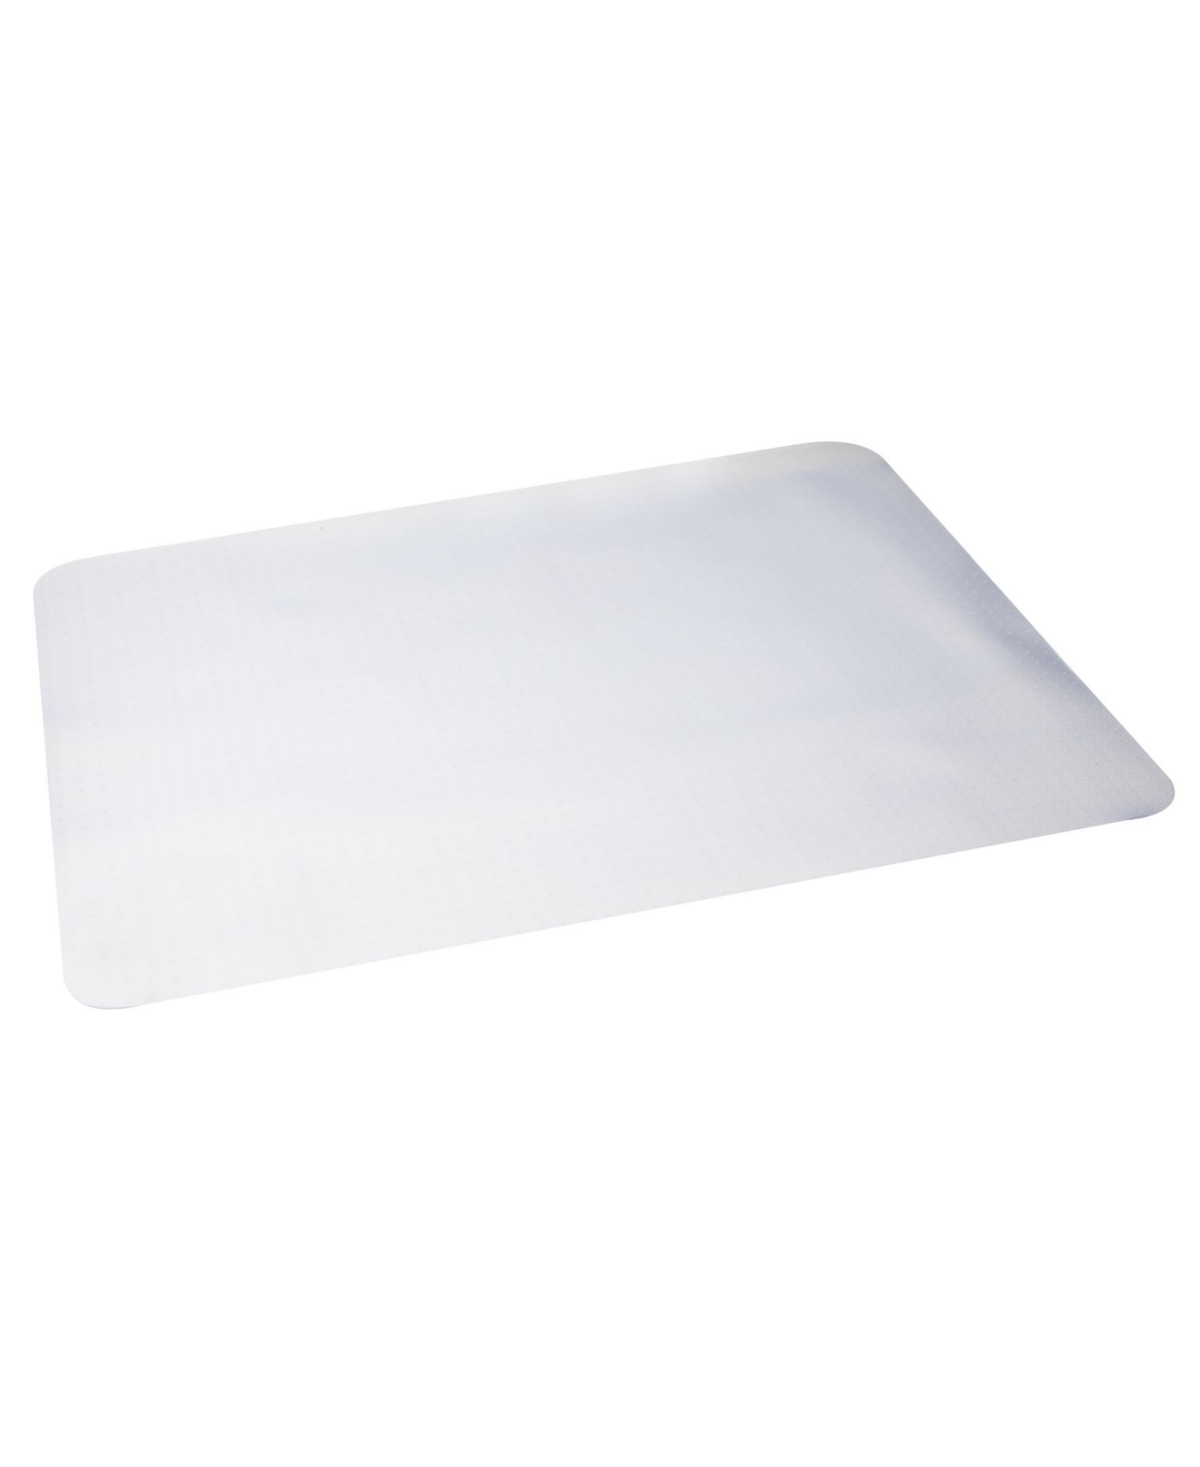 Rectangular Carpet Protection Mat, Office Pad for Rolling Chairs - Clear